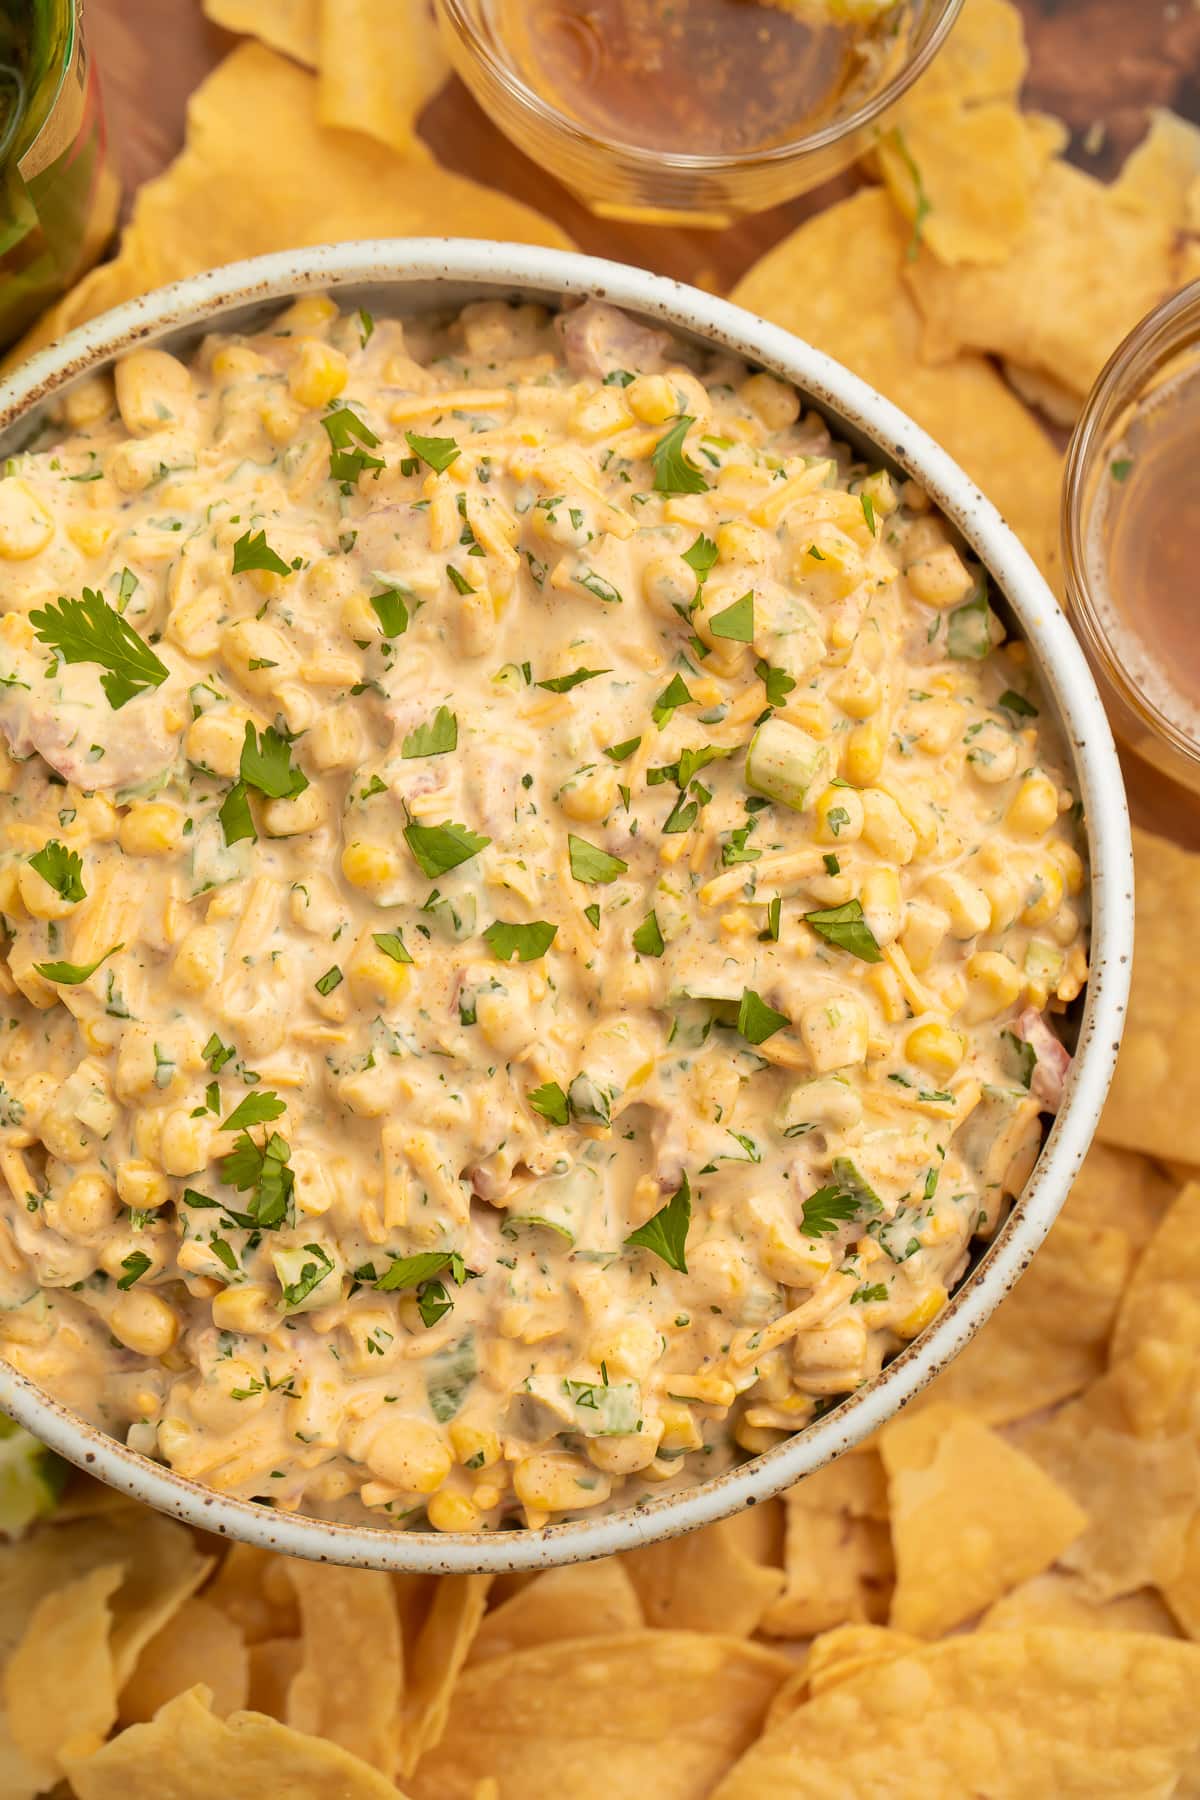 Top down view of a bowl of Mexican corn dip surrounded by tortilla chips.